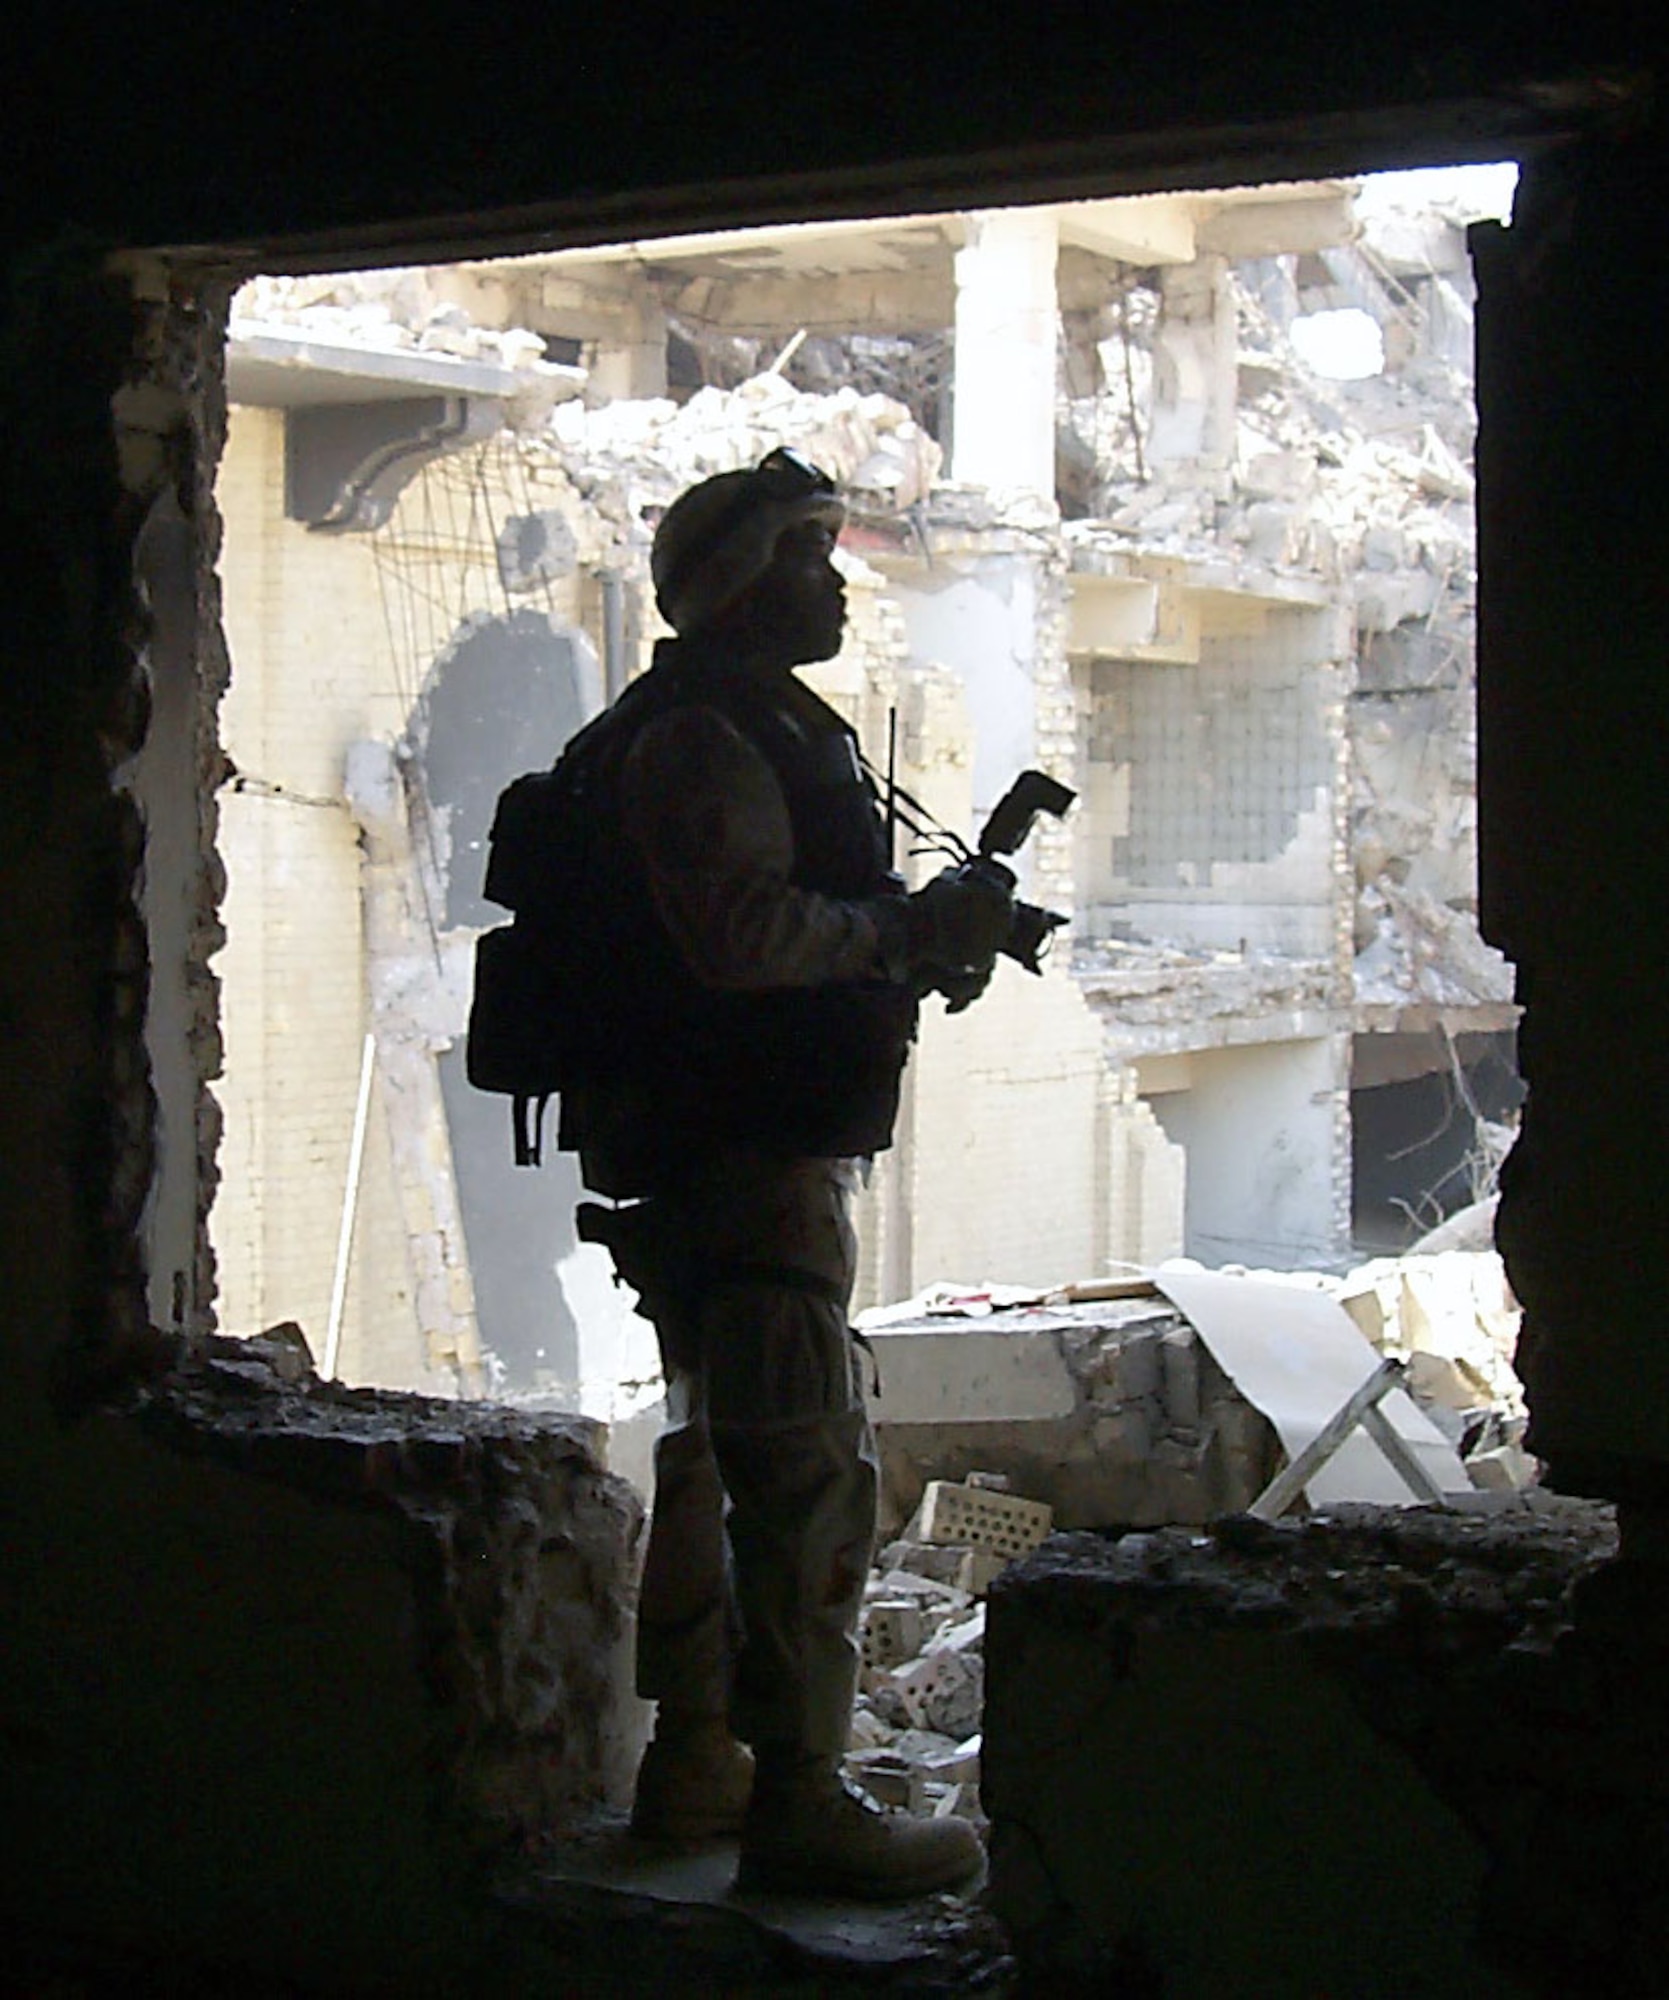 BAGHDAD, Iraq -- Master Sgt. Michael Best searches for photo opportunities inside a bomb-damaged Iraqi Ministry of Defense building here.  Best is a combat-camera photographer deployed from Charleston Air Force Base, S.C.  (U.S. Air Force photo by Capt. Roger Burdette)